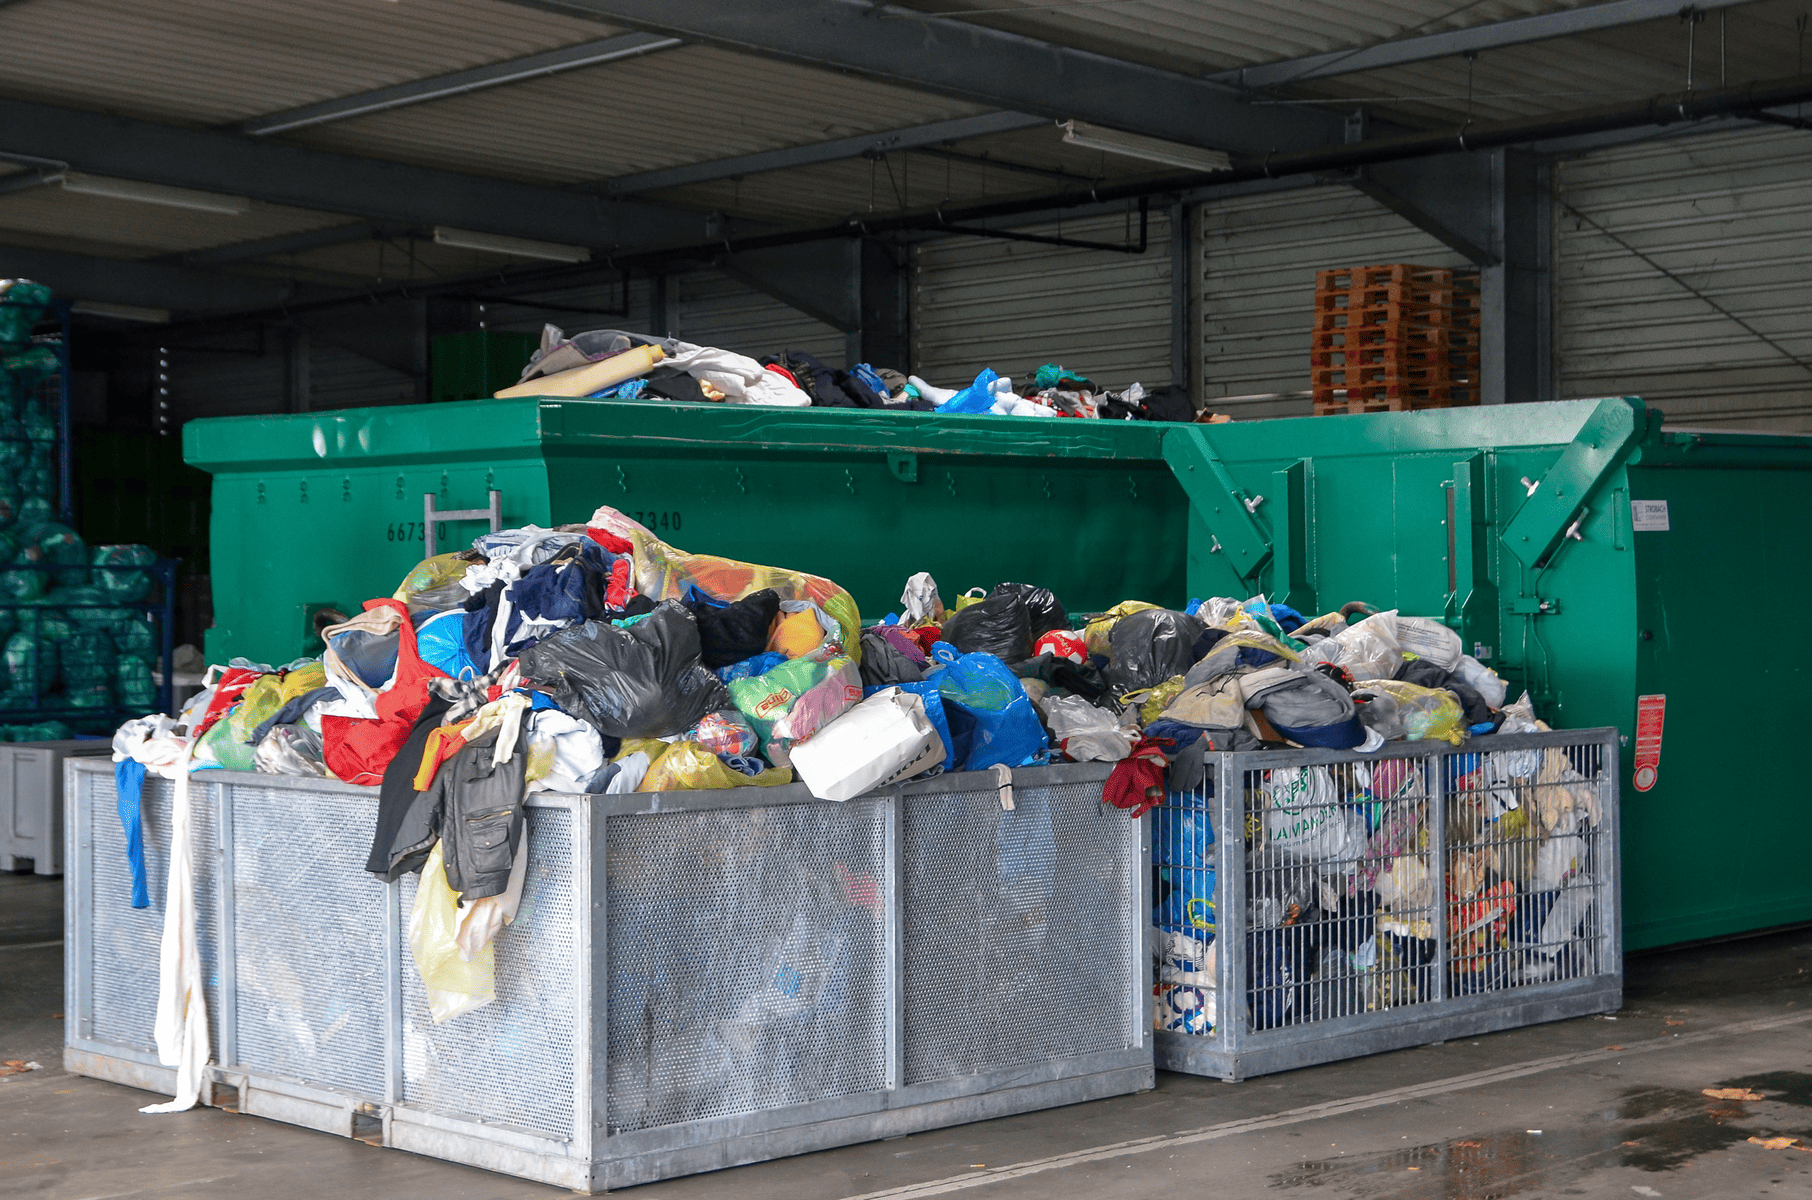 Used clothes and textile waste at a landfill